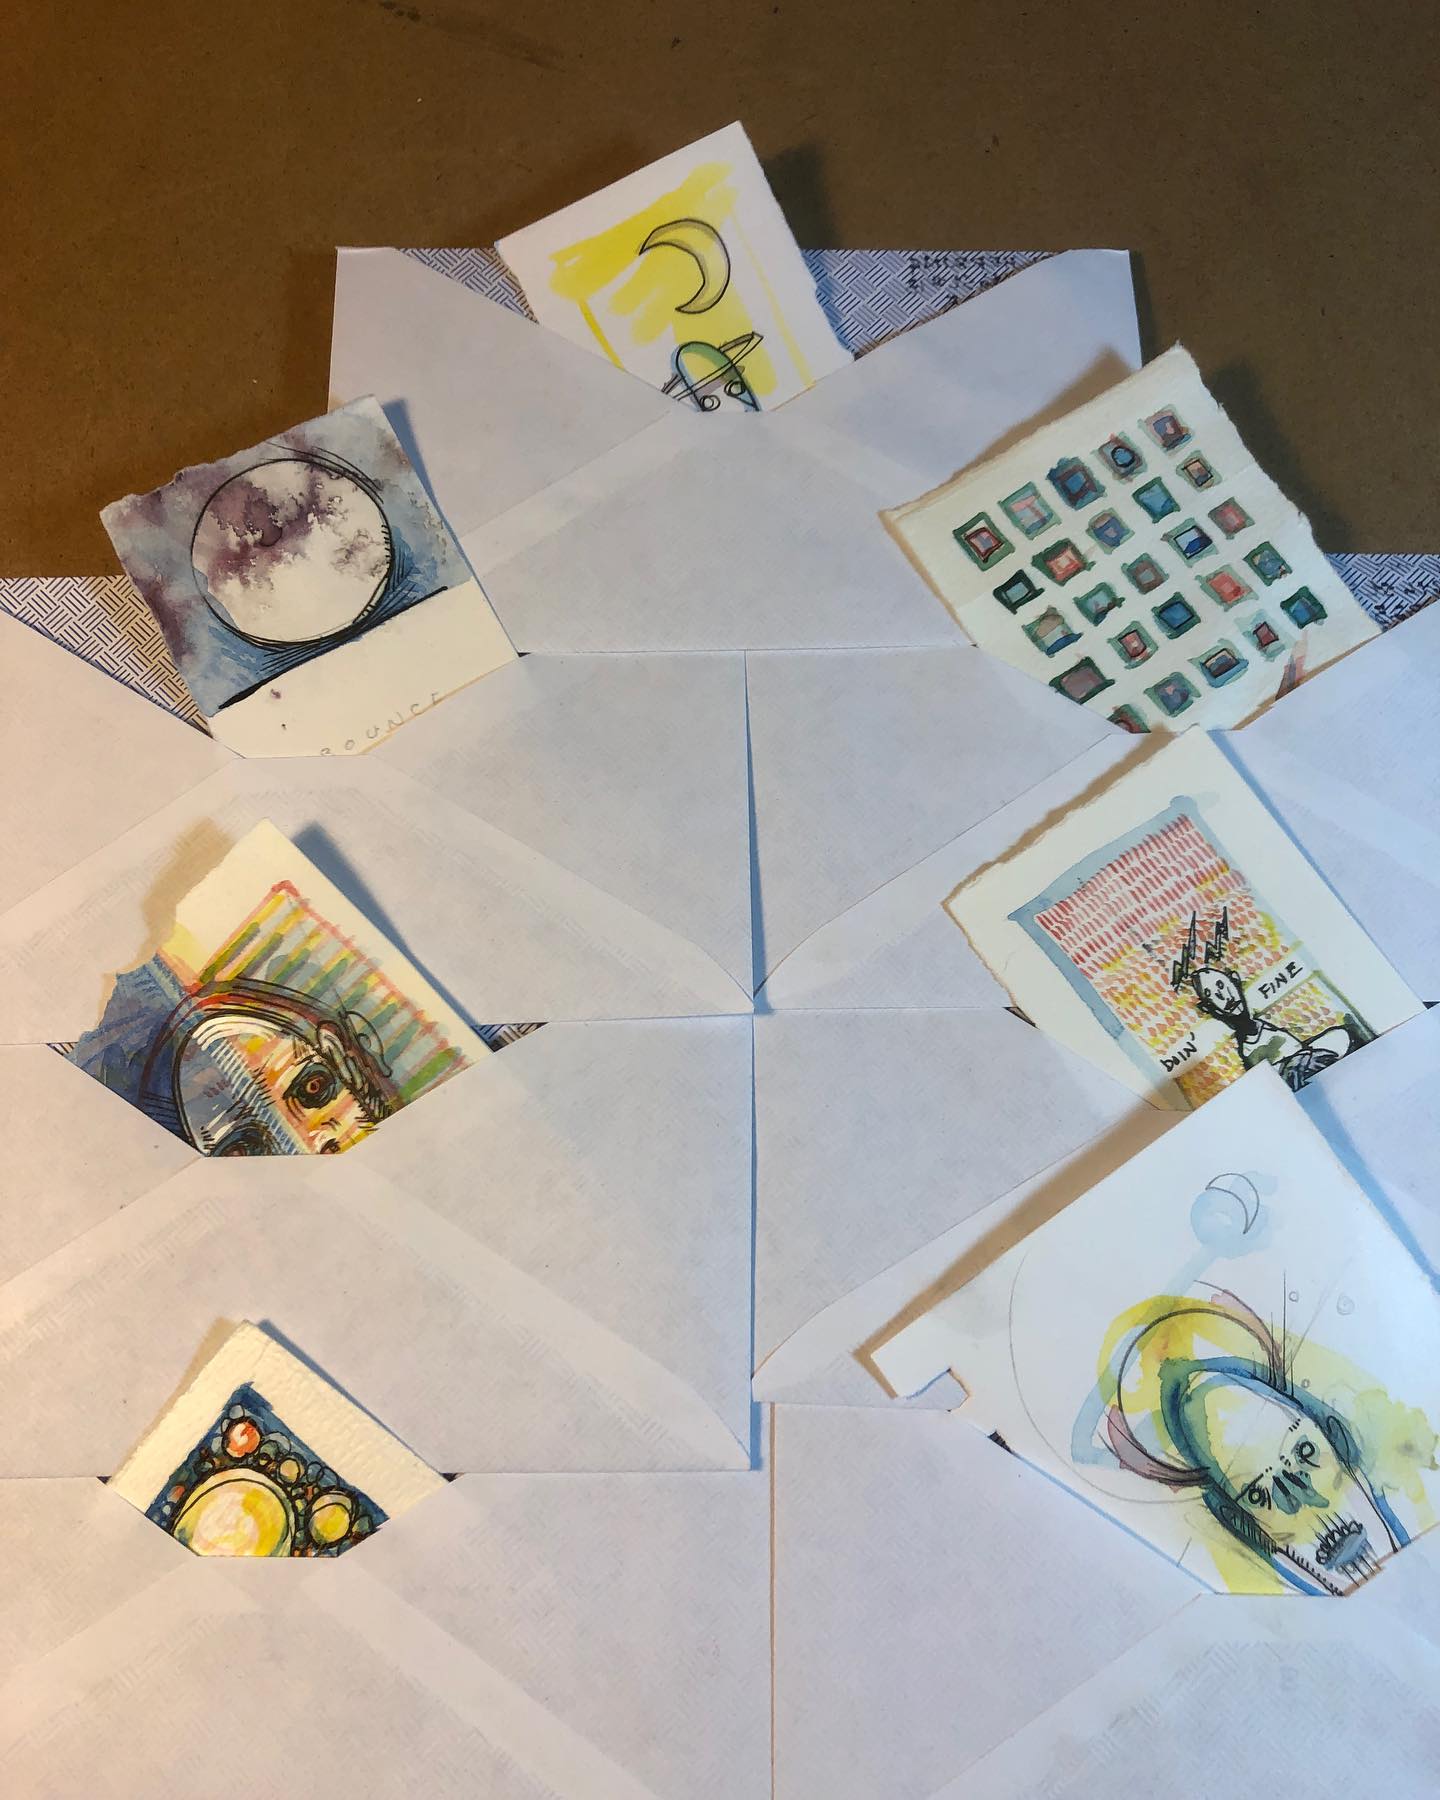 Seven small ink/watercolor drawings arranged at 45 degree angles within white mailing envelopes